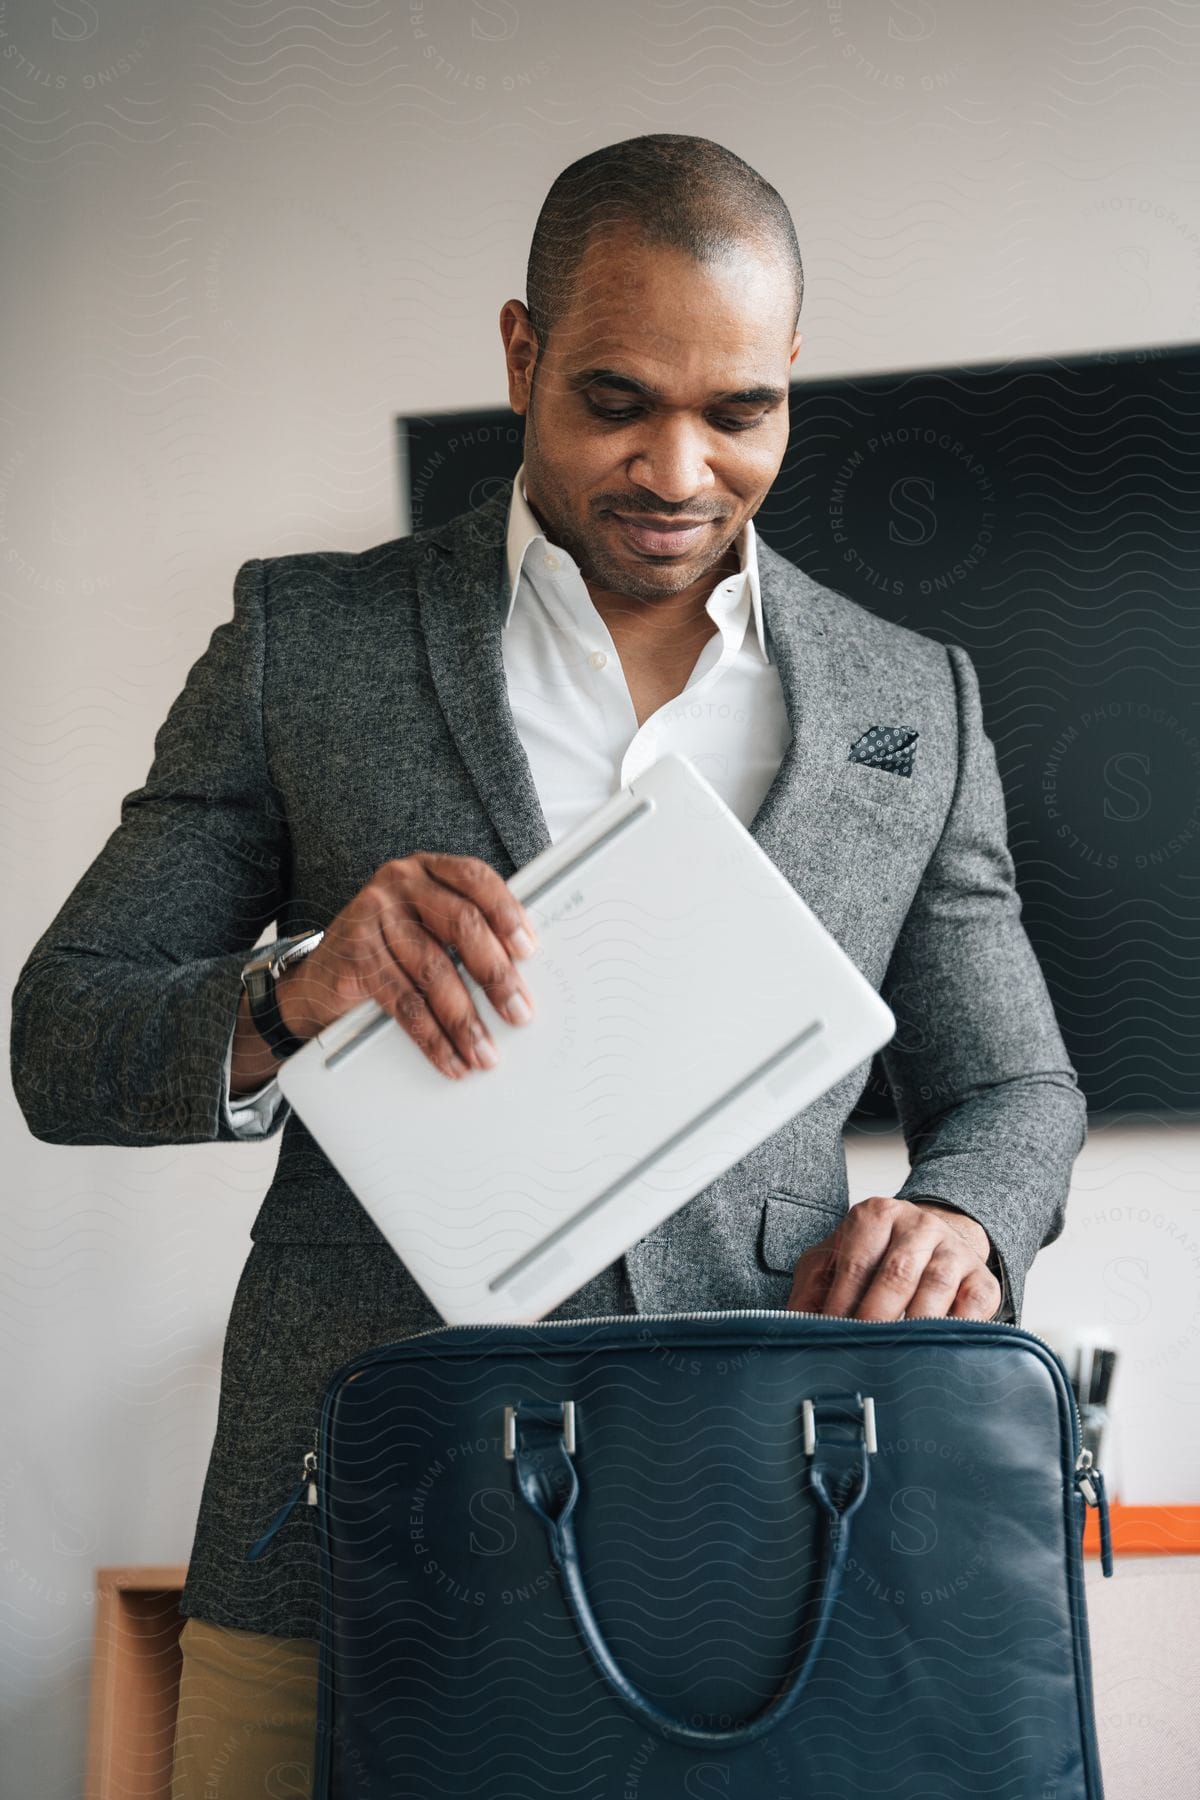 Stock photo of man smiles while standing in office and putting laptop into briefcase.